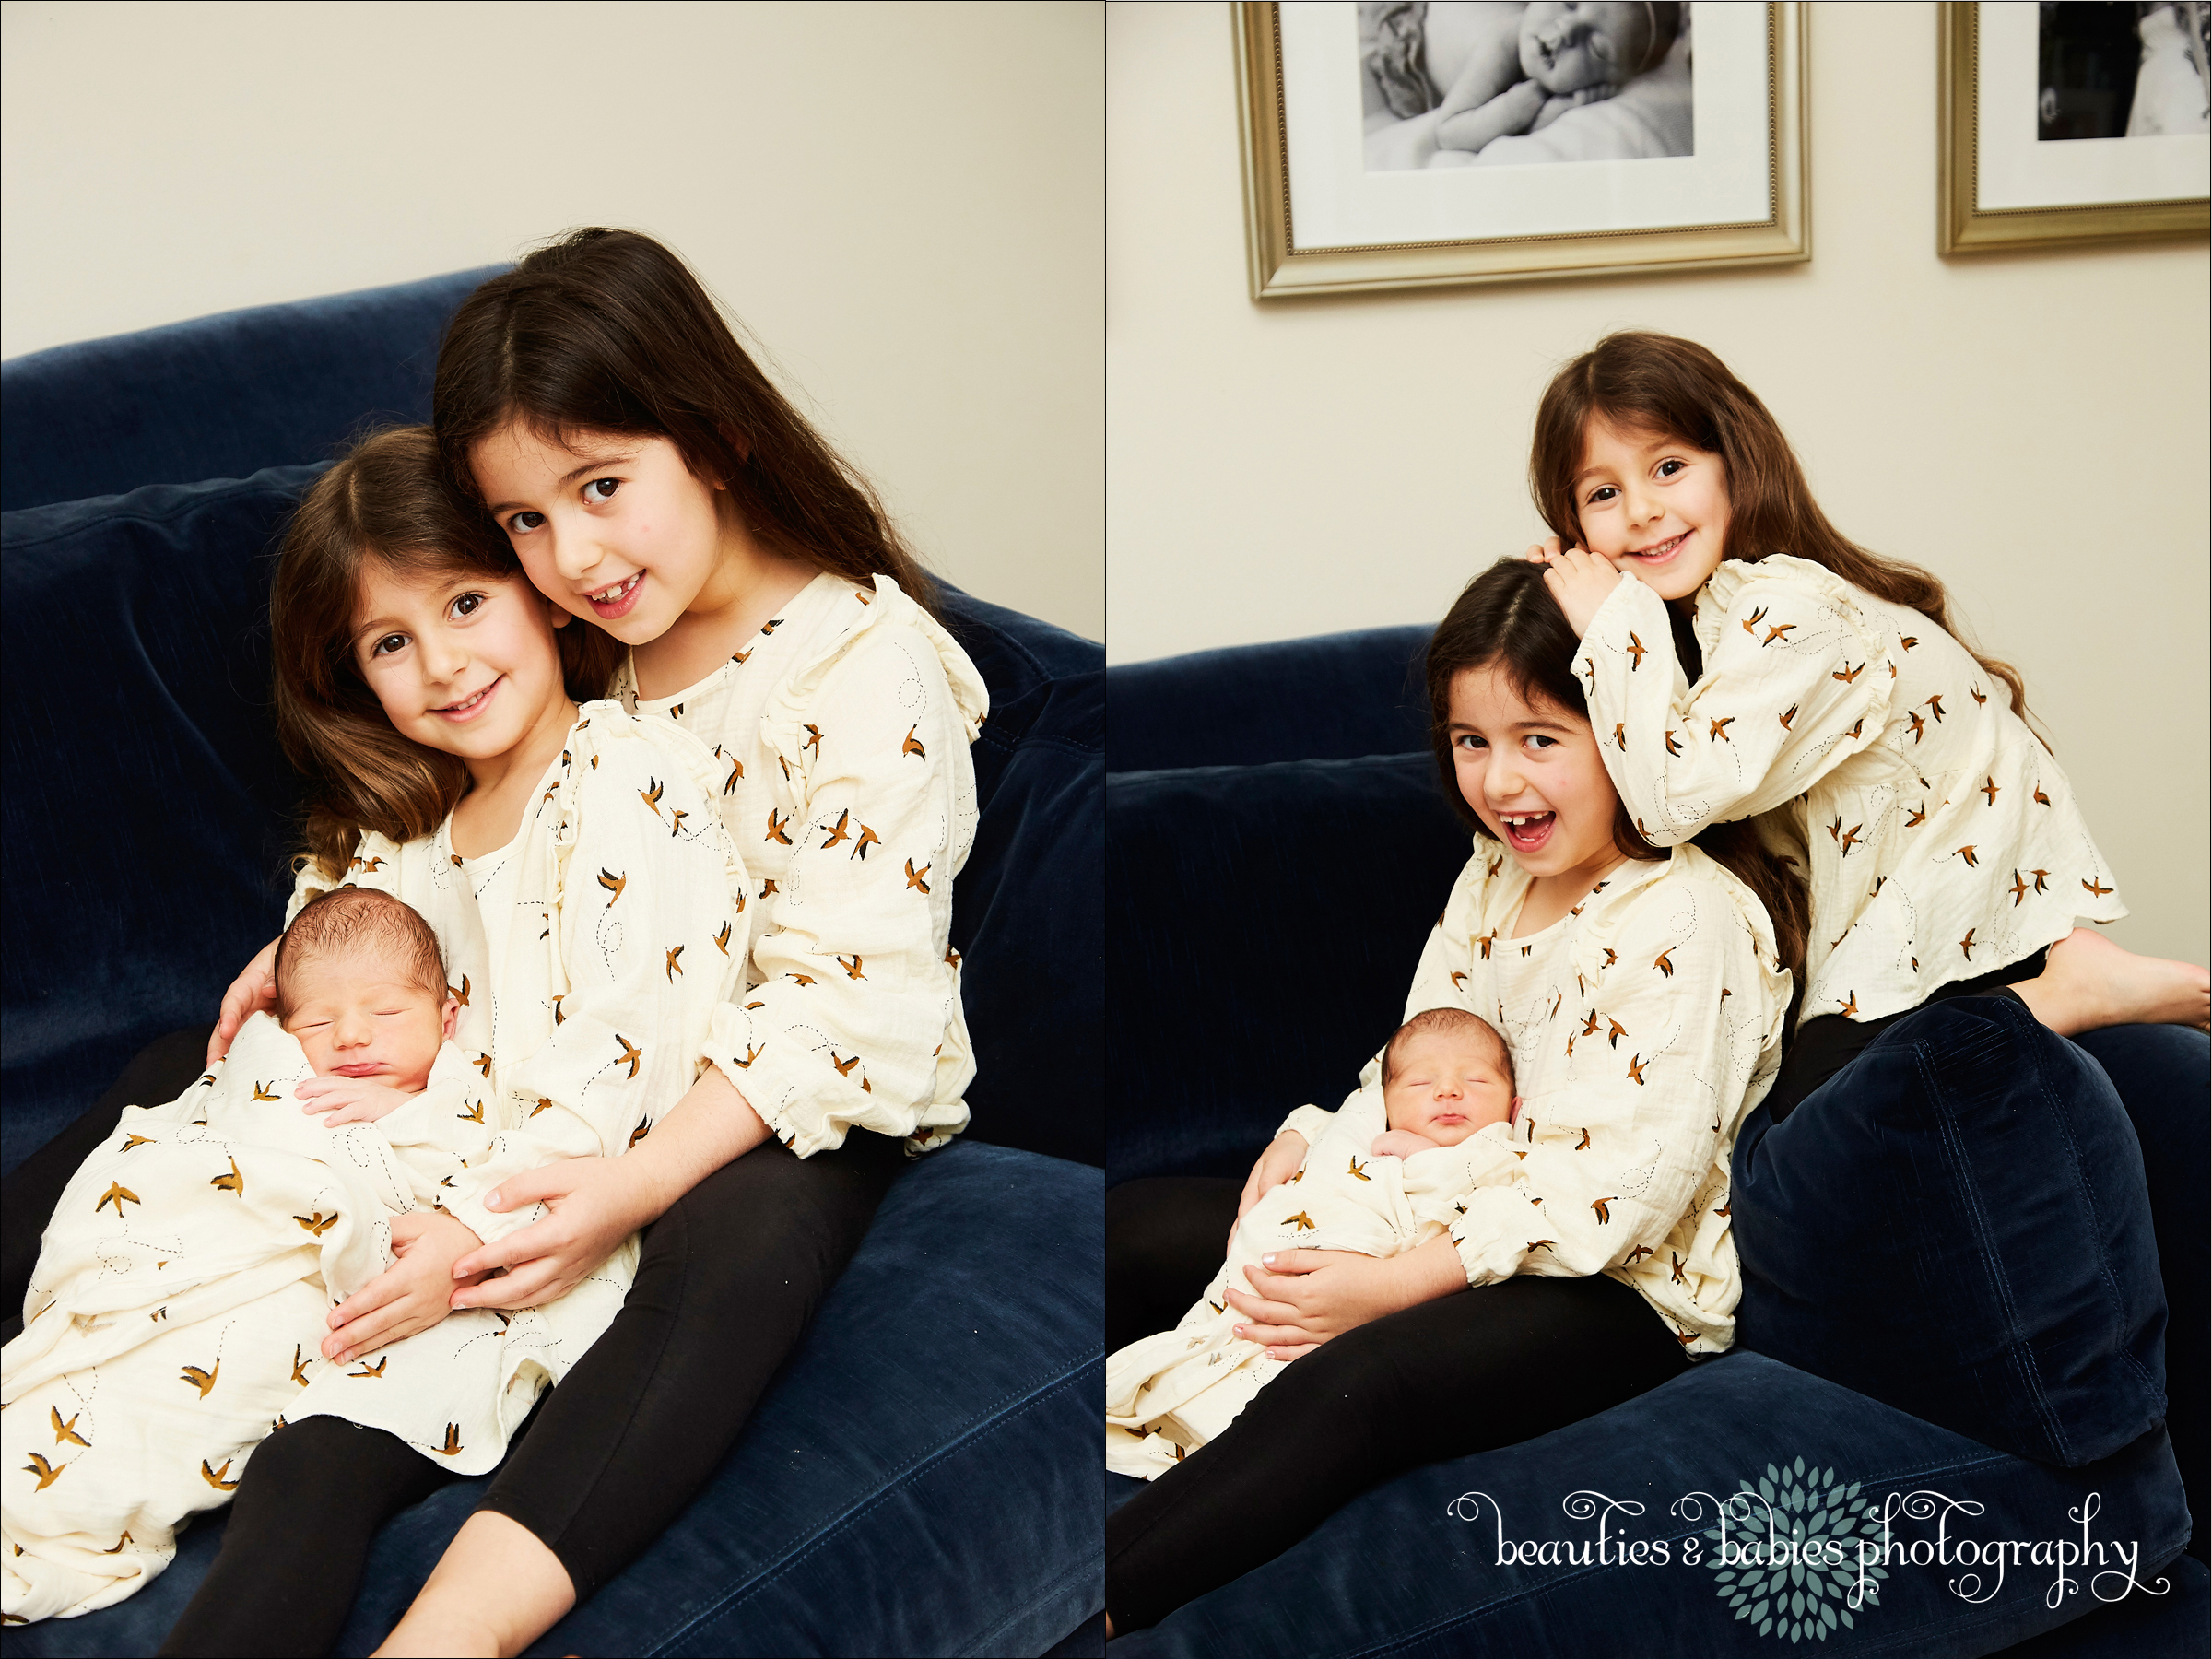 Family newborn photography professional in-home newborn photographer Los Angeles